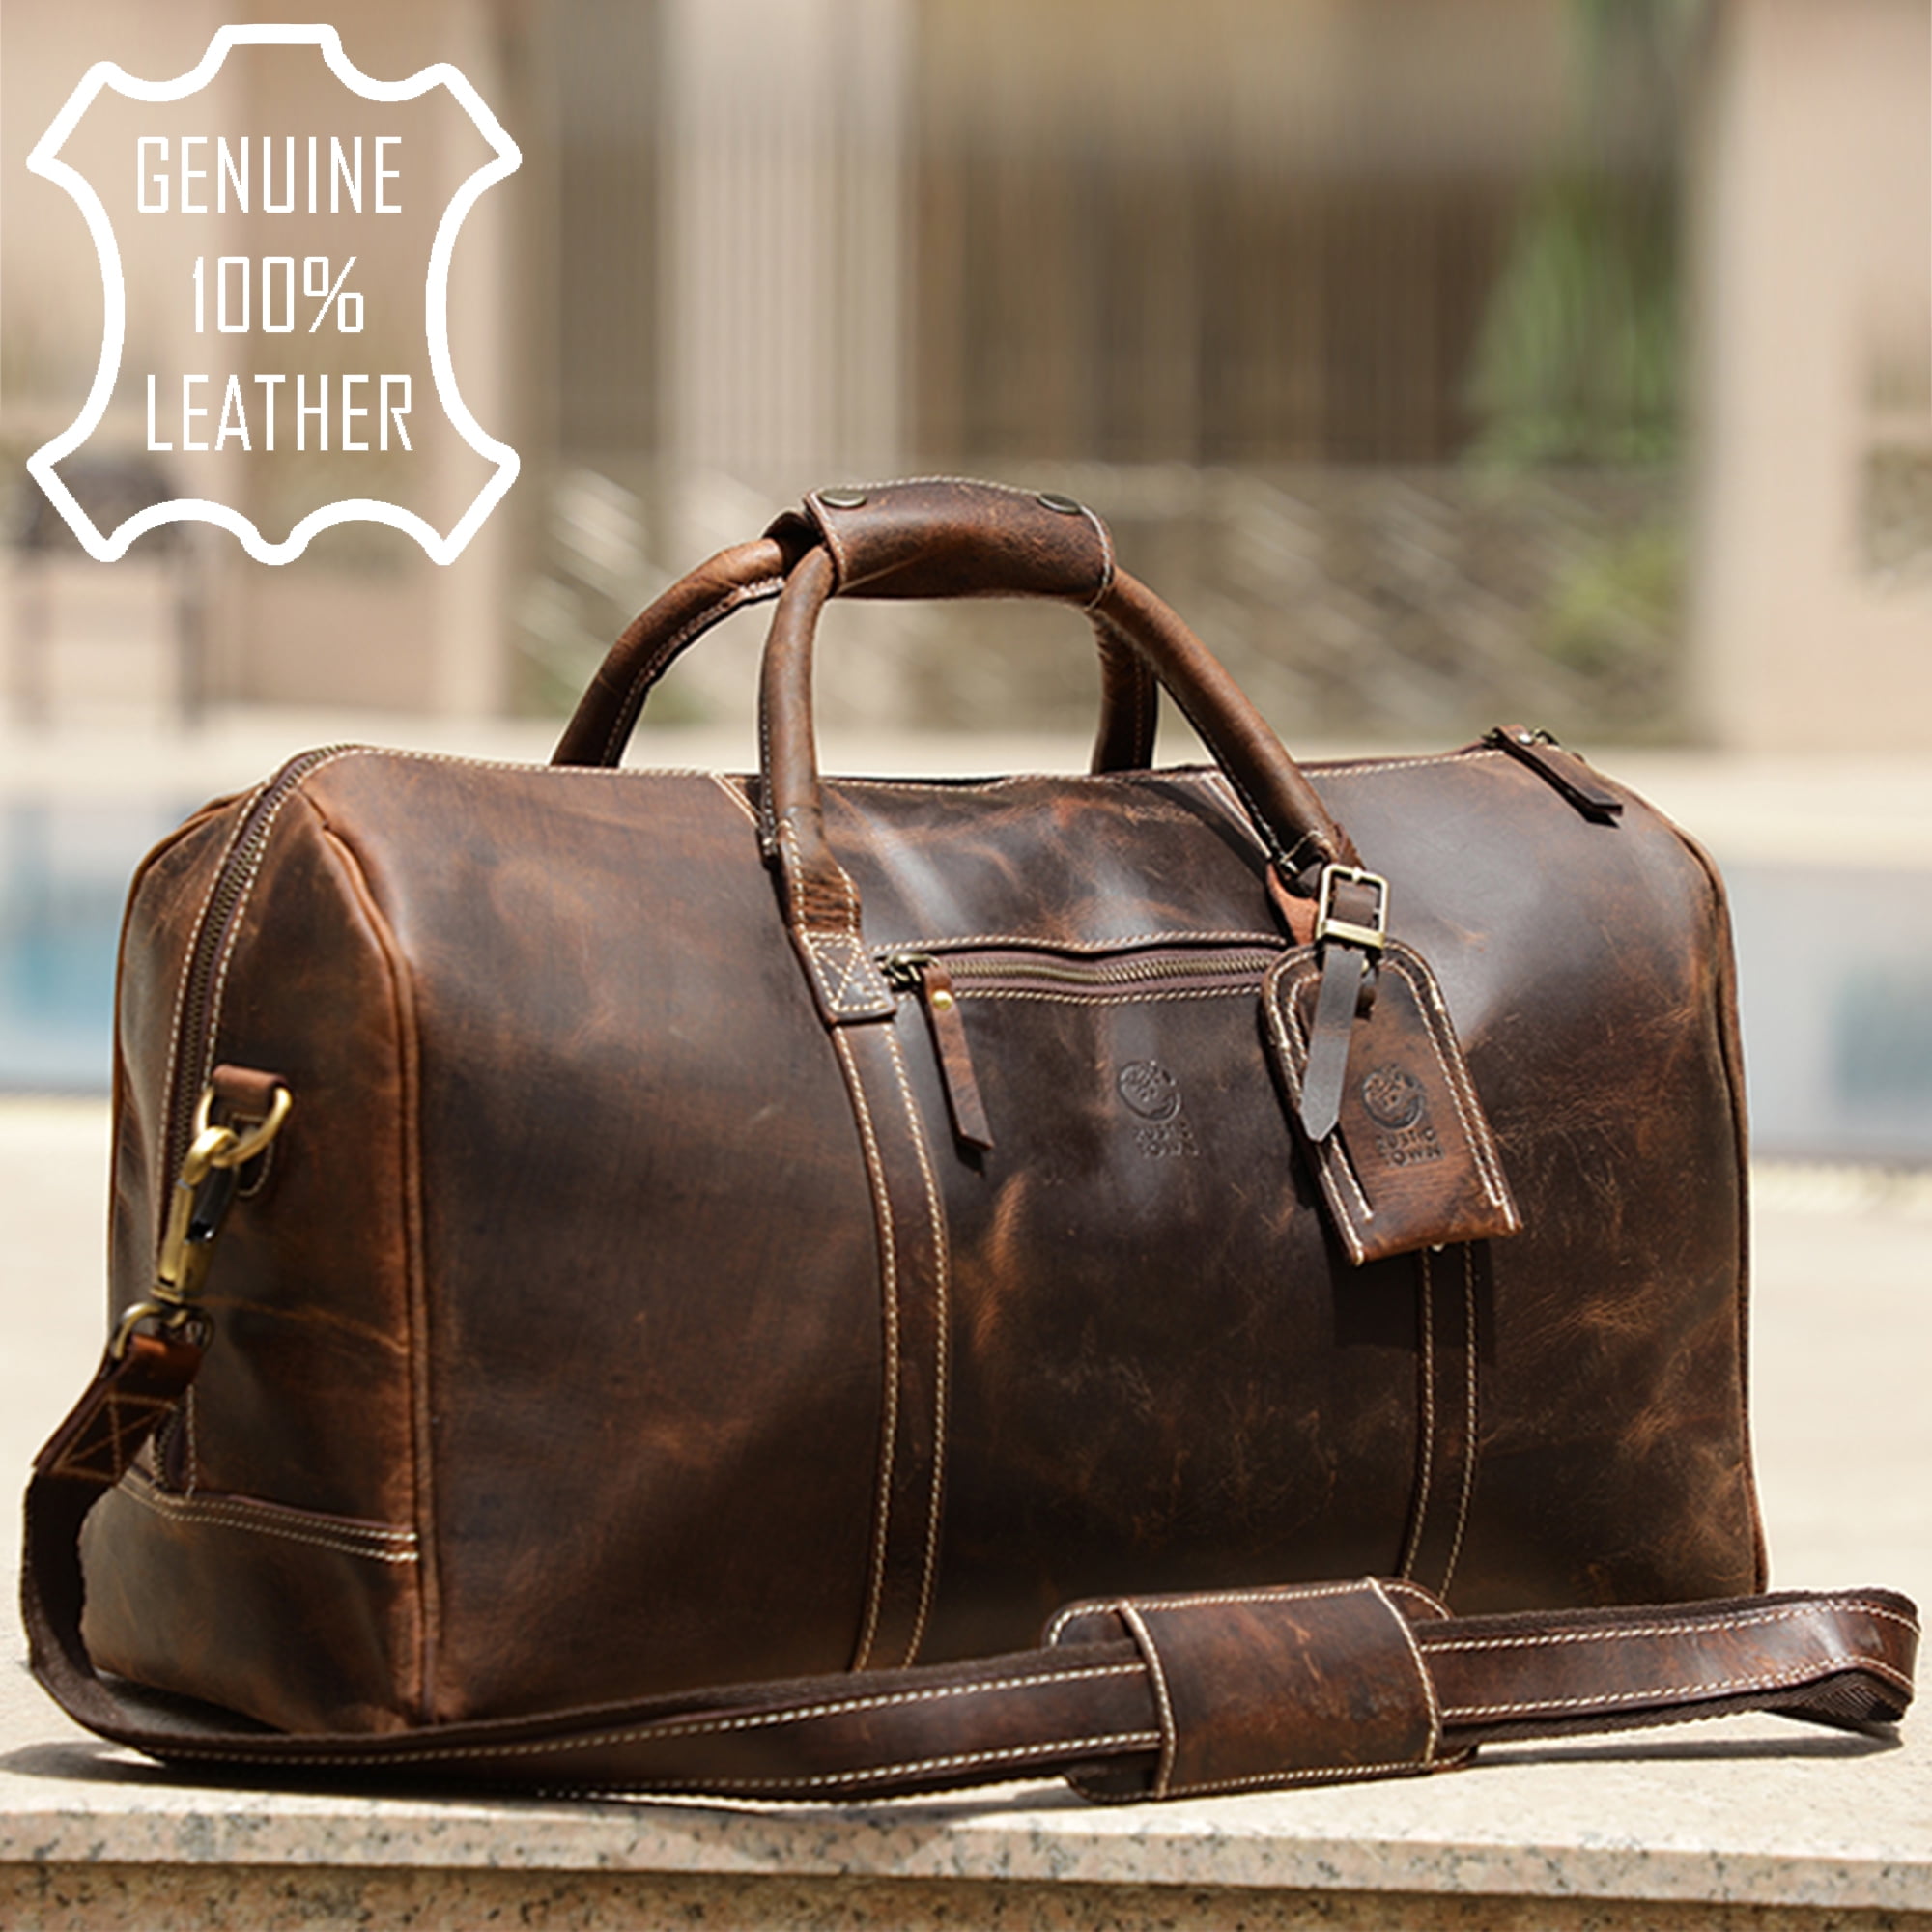 Mens Bag Leather Duffle Travel Luggage Gym Vintage Genuine Weekend Overnight New